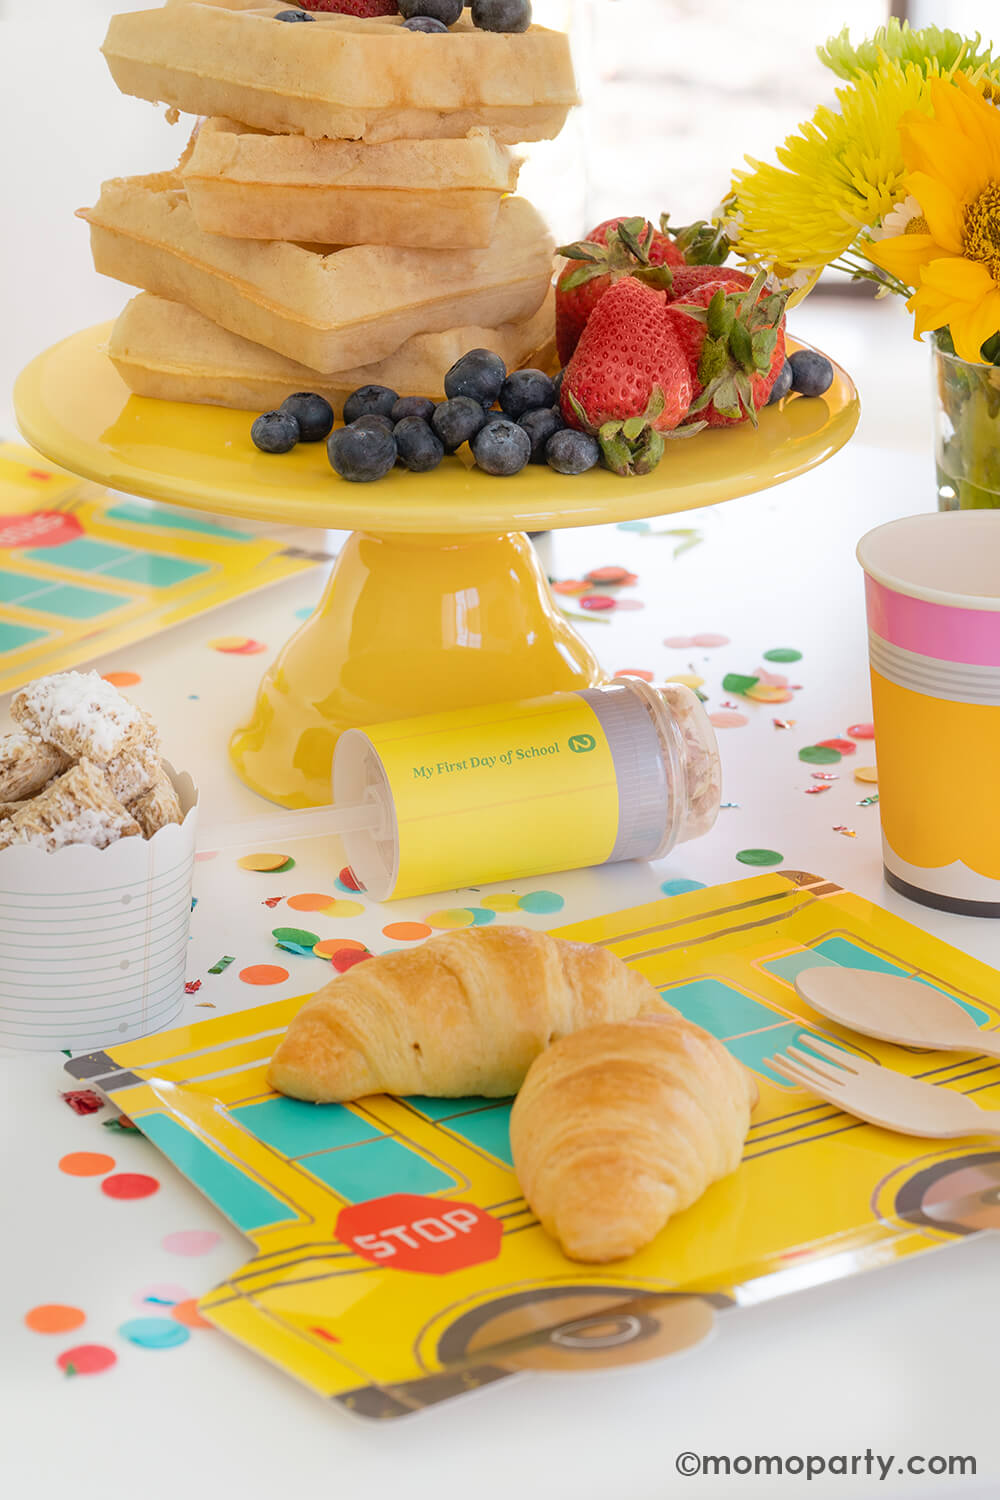 A first day of school breakfast celebration table with delicious breakfast food including Belgium waffles stacked as a cake with mixed berries, on the table is a school bus shaped party plates with mini croissants for kids, along with pencil shaped party cups and pencil party poppers, these back to school party ideas by Momo Party make a great inspiration for any school themed celebrations with your kids at home.